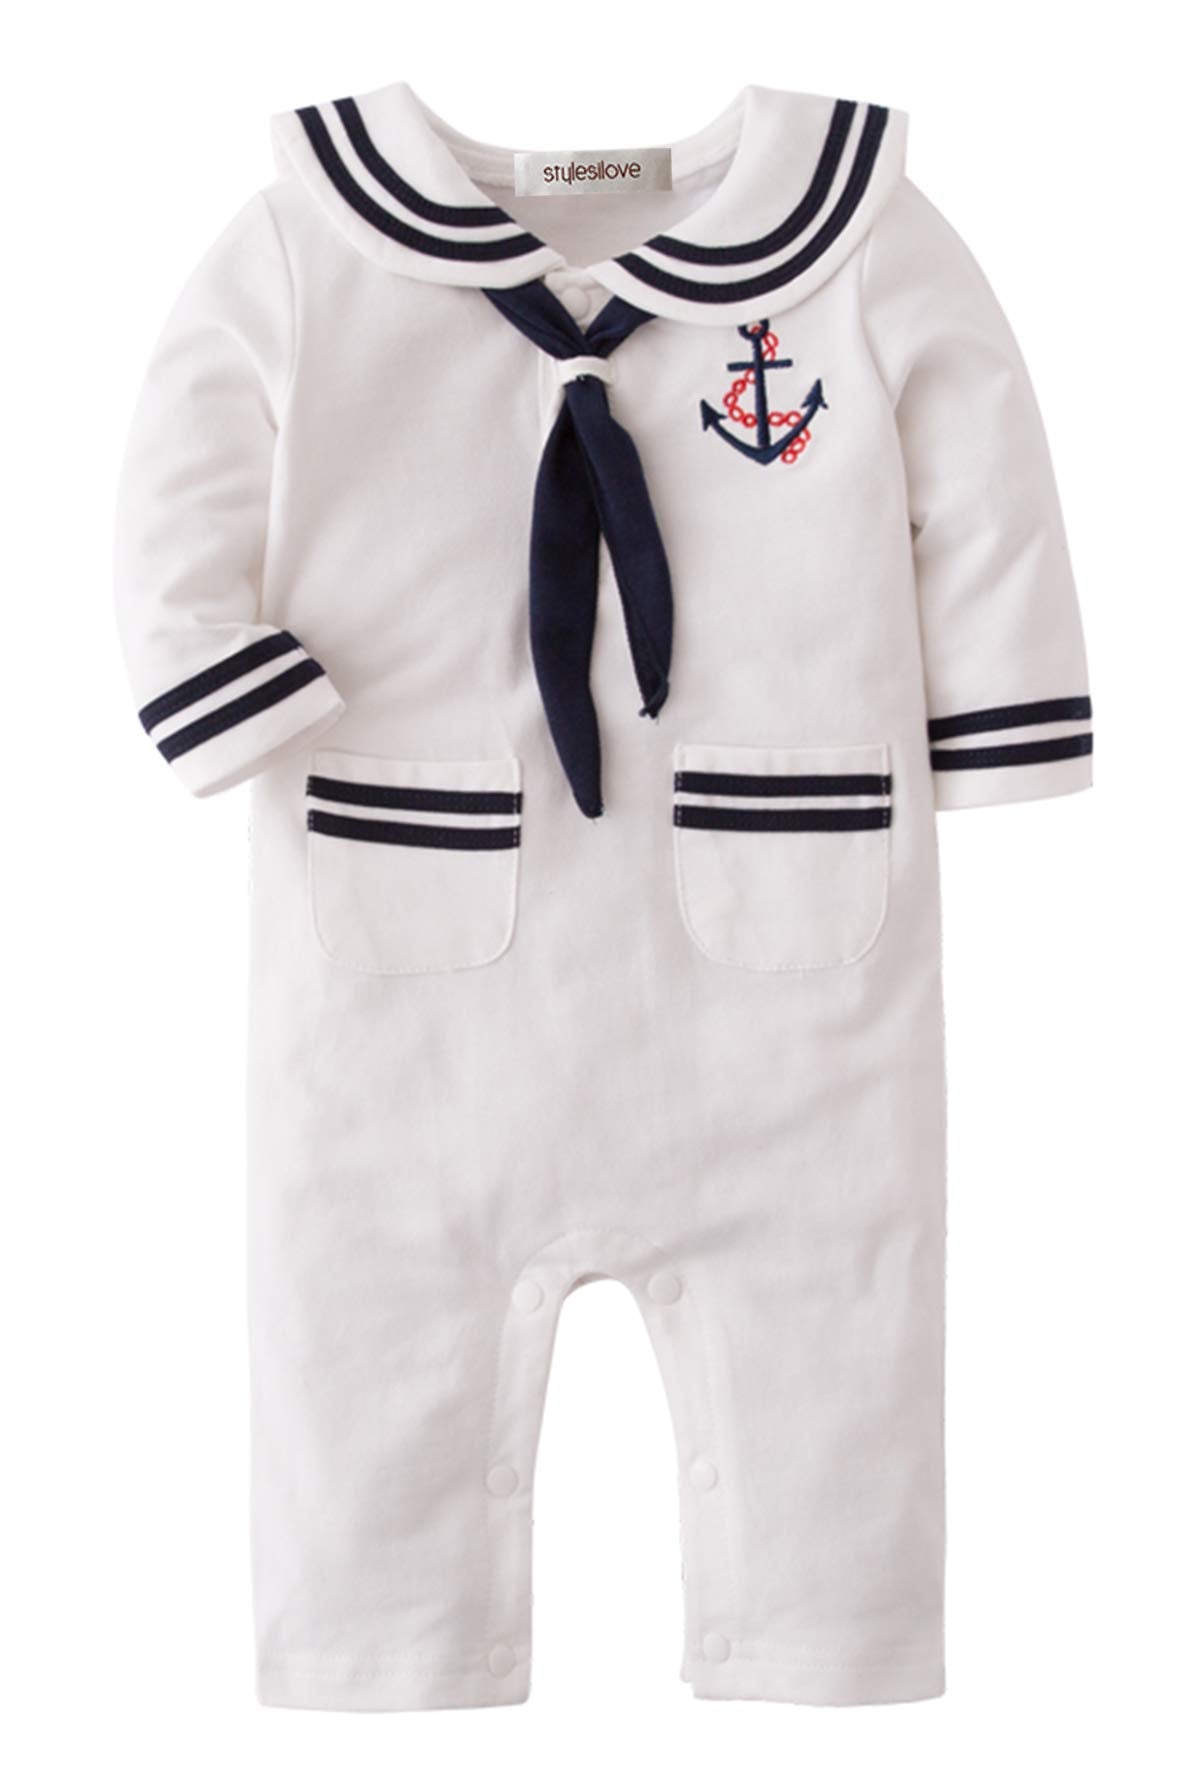 stylesilove.com Baby Boy Marine Sailor Cotton Romper Onesie with Hat and Necktie 3pcs Holiday Outfit